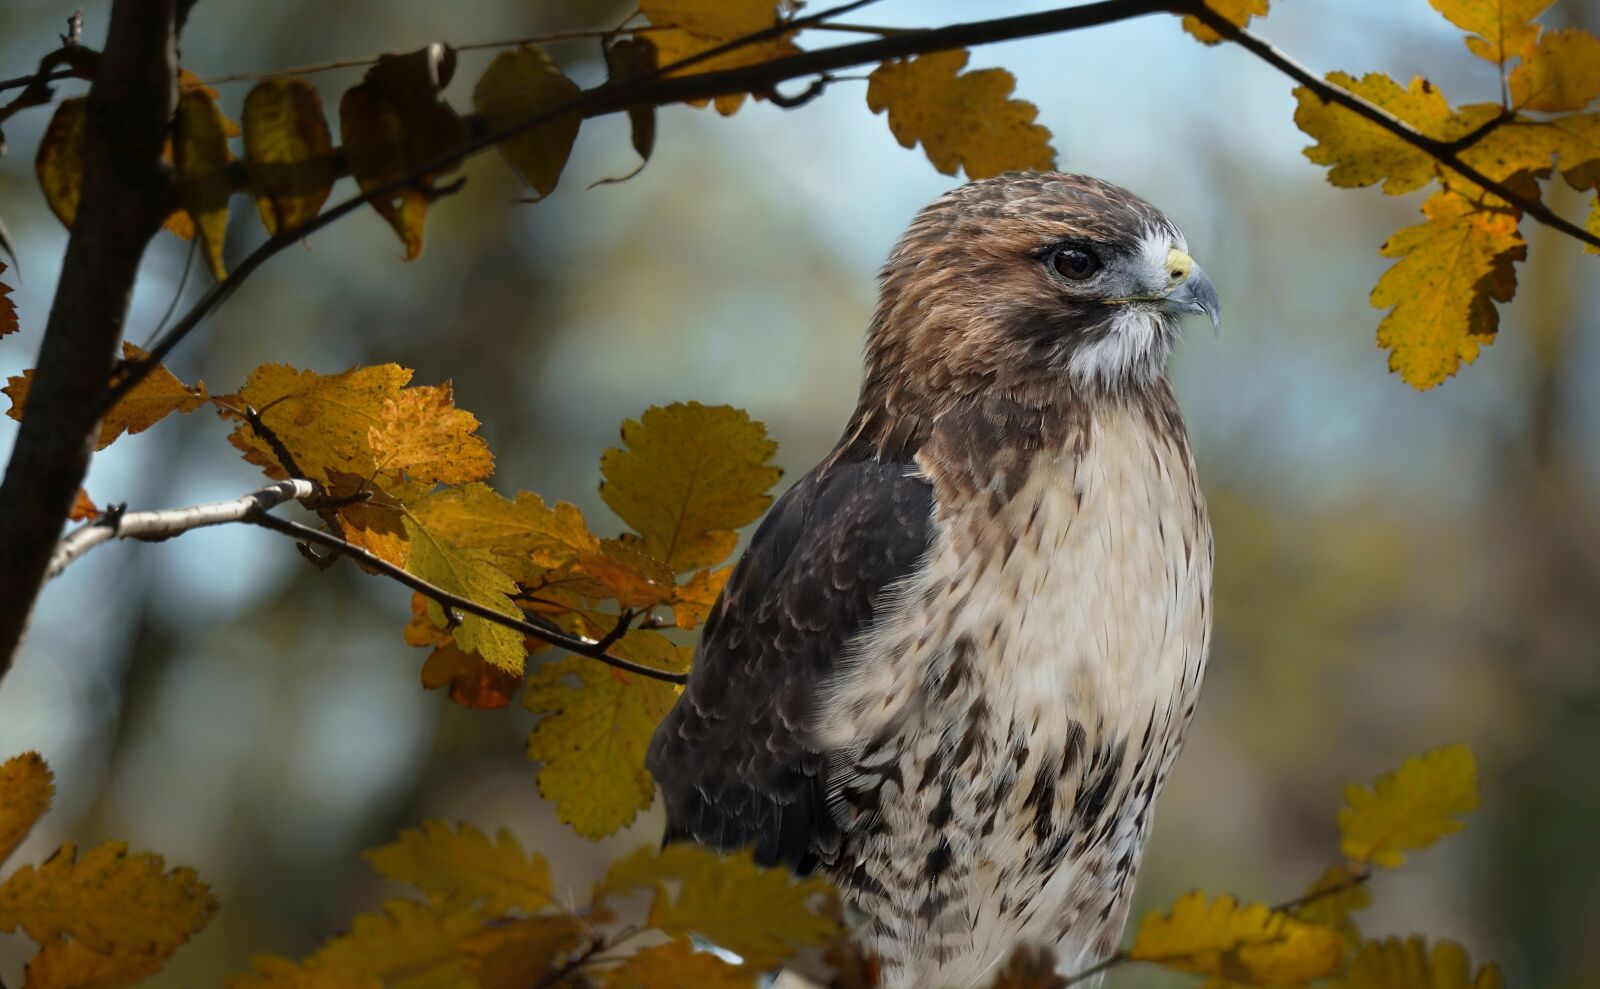 Sony a6300 sample photo. Red tailed hawk, hawk photography